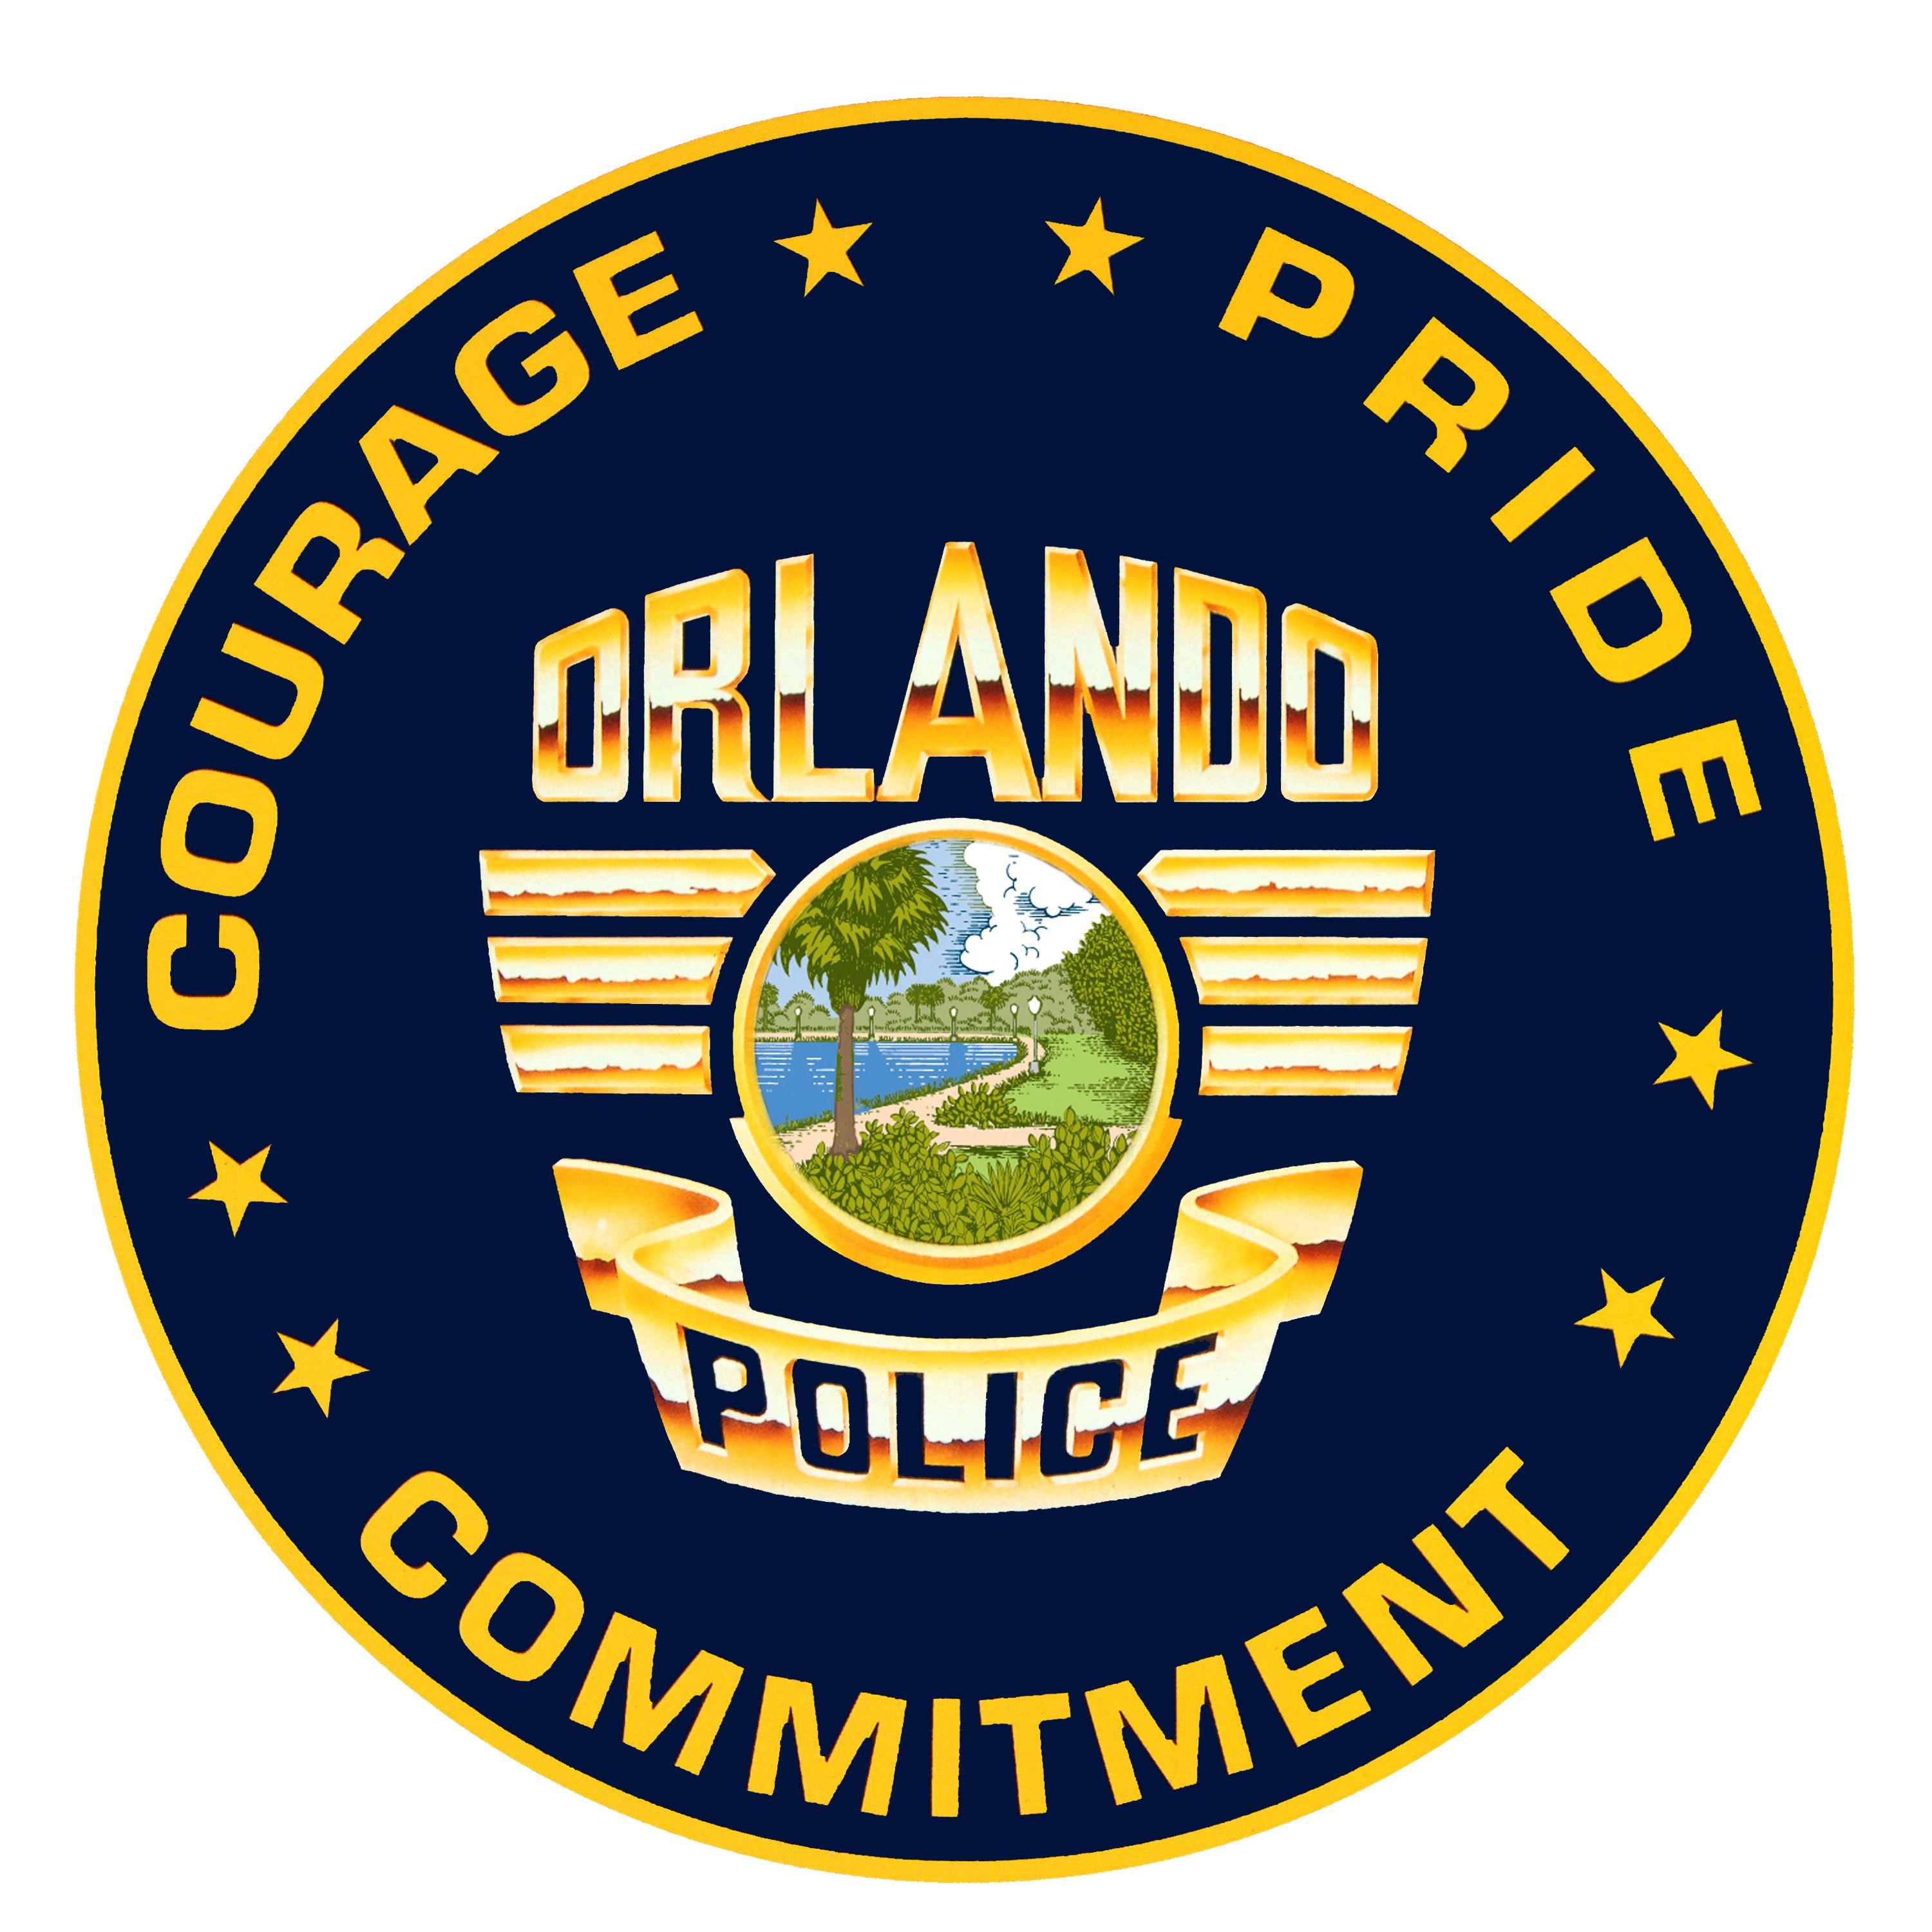 The Police Circle Logo - City of Orlando Police Department | Official Website for City of ...